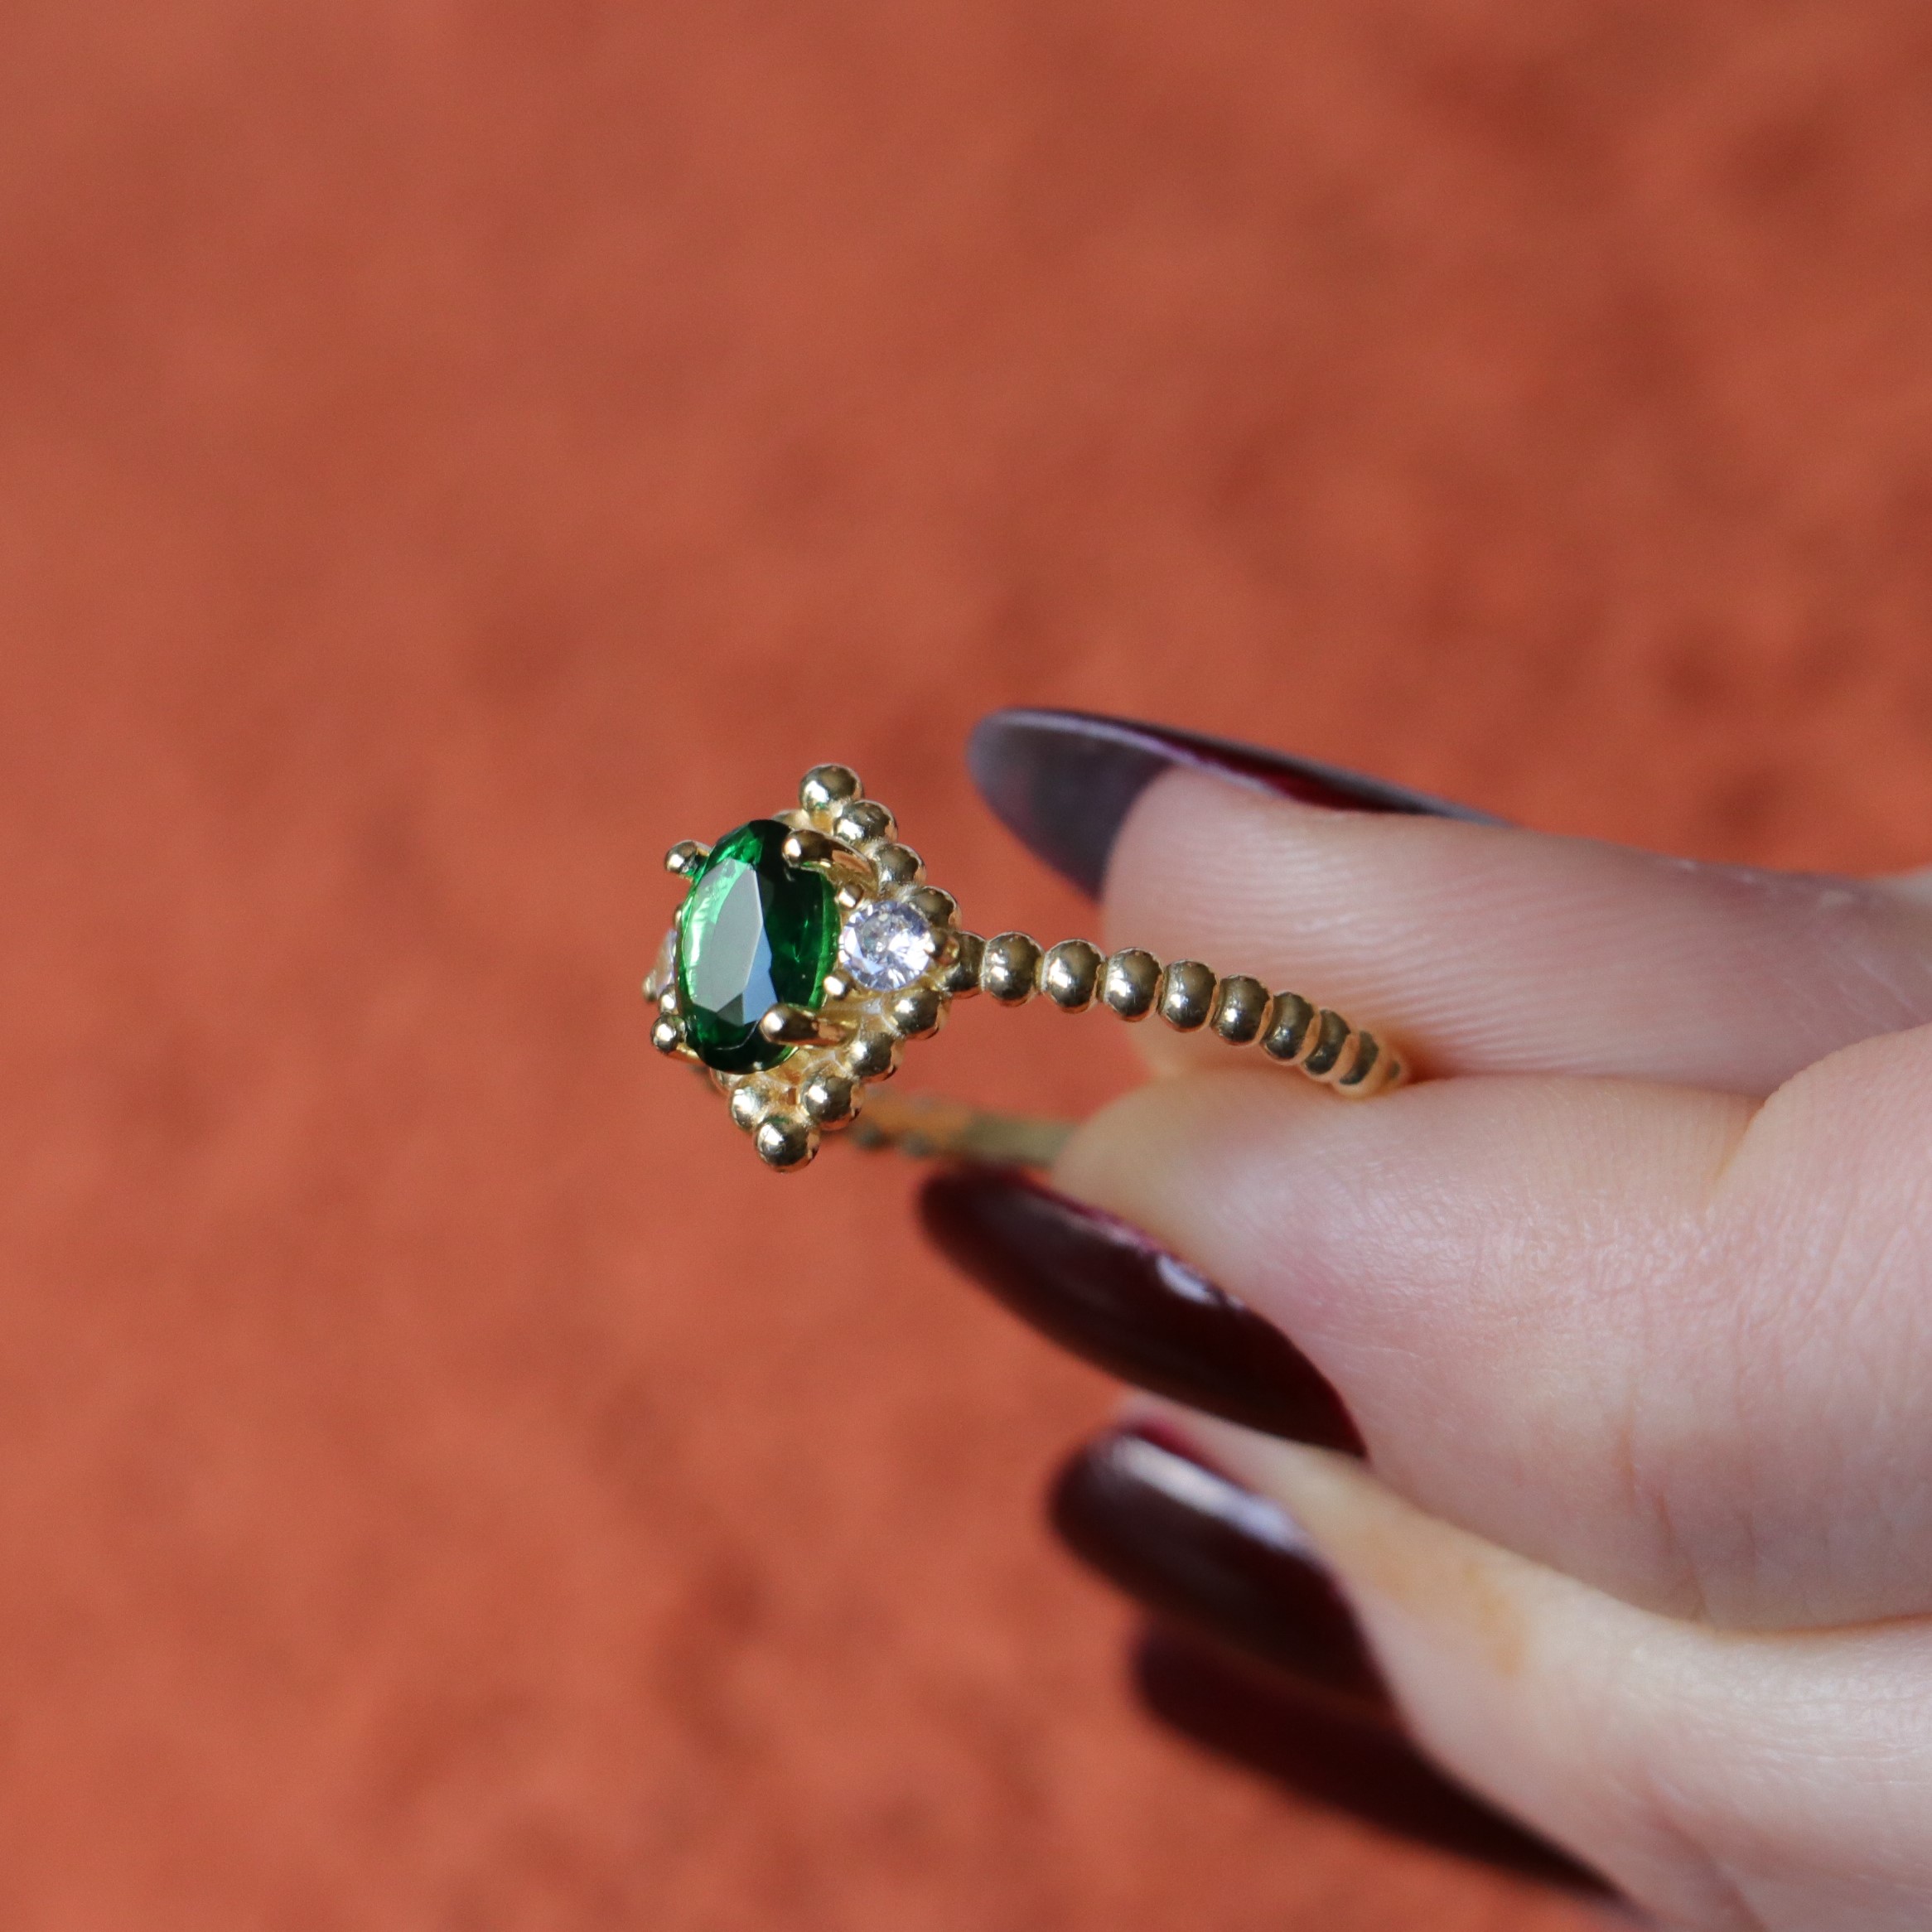 Lab. Emerald and Swarovski Stone 925 Silver Gold Plated Ring